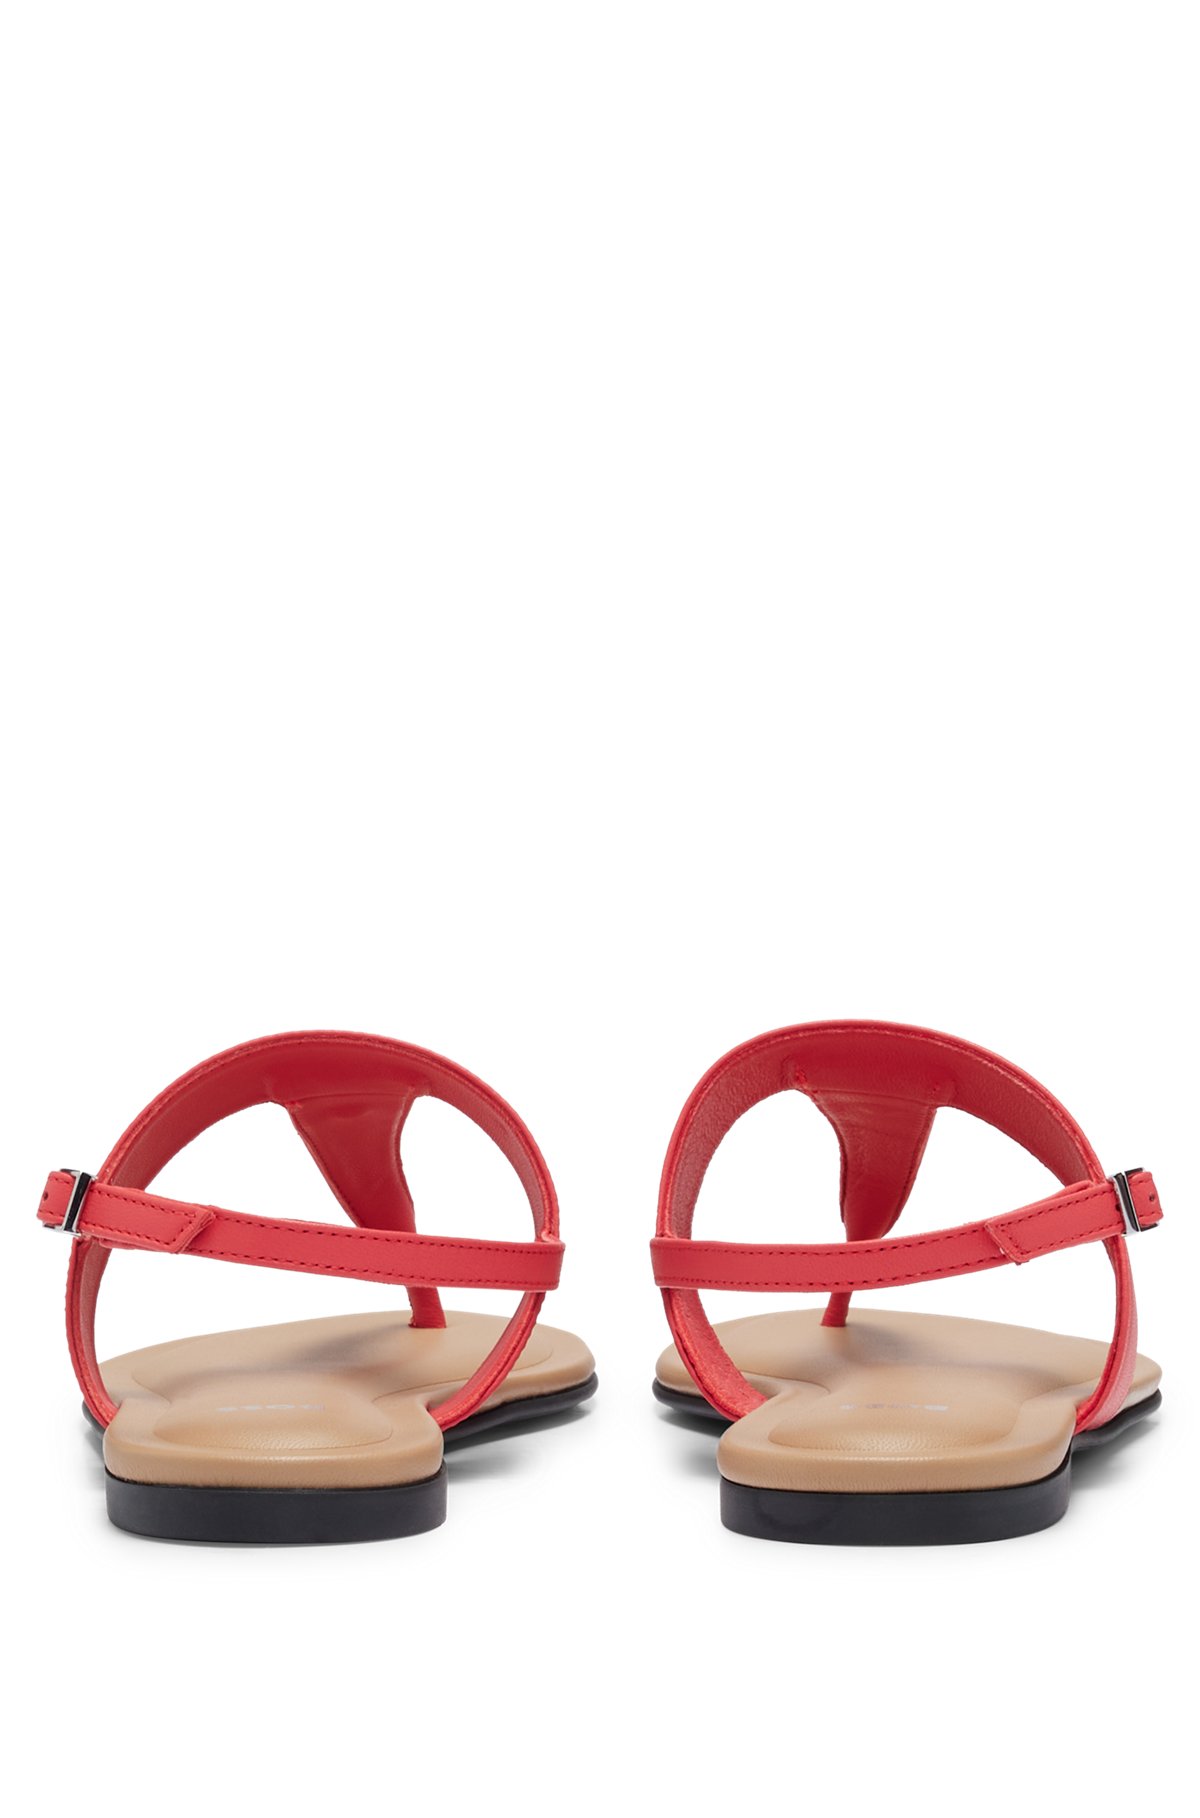 Nappa-leather thong sandals with logo trim, Pink